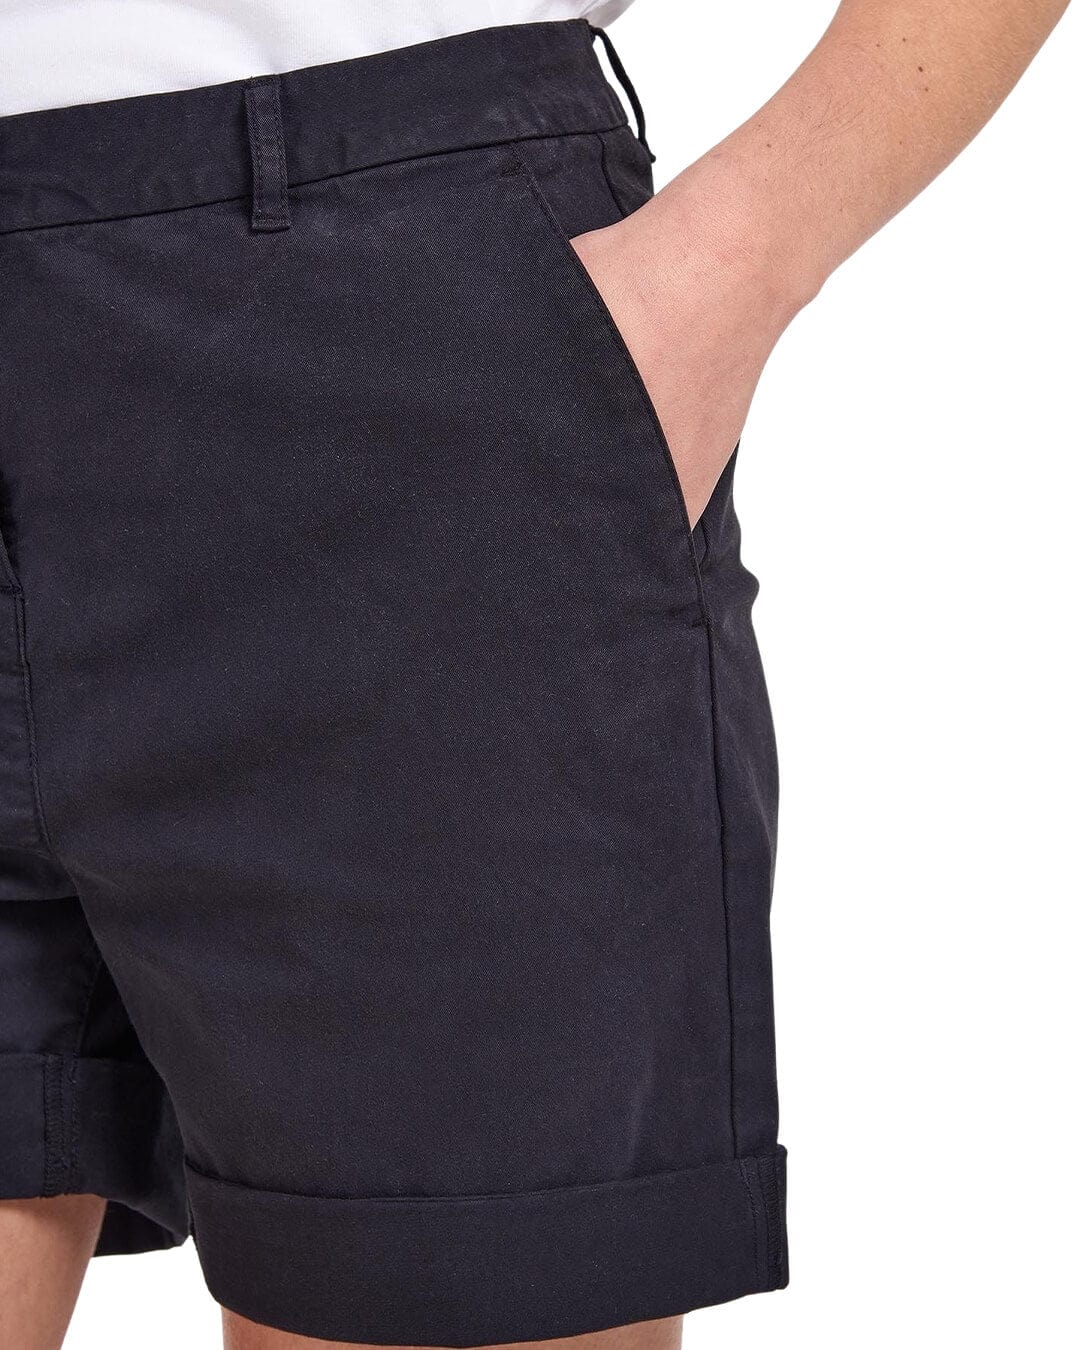 Barbour Shorts Barbour Navy Cotton Chino Shorts